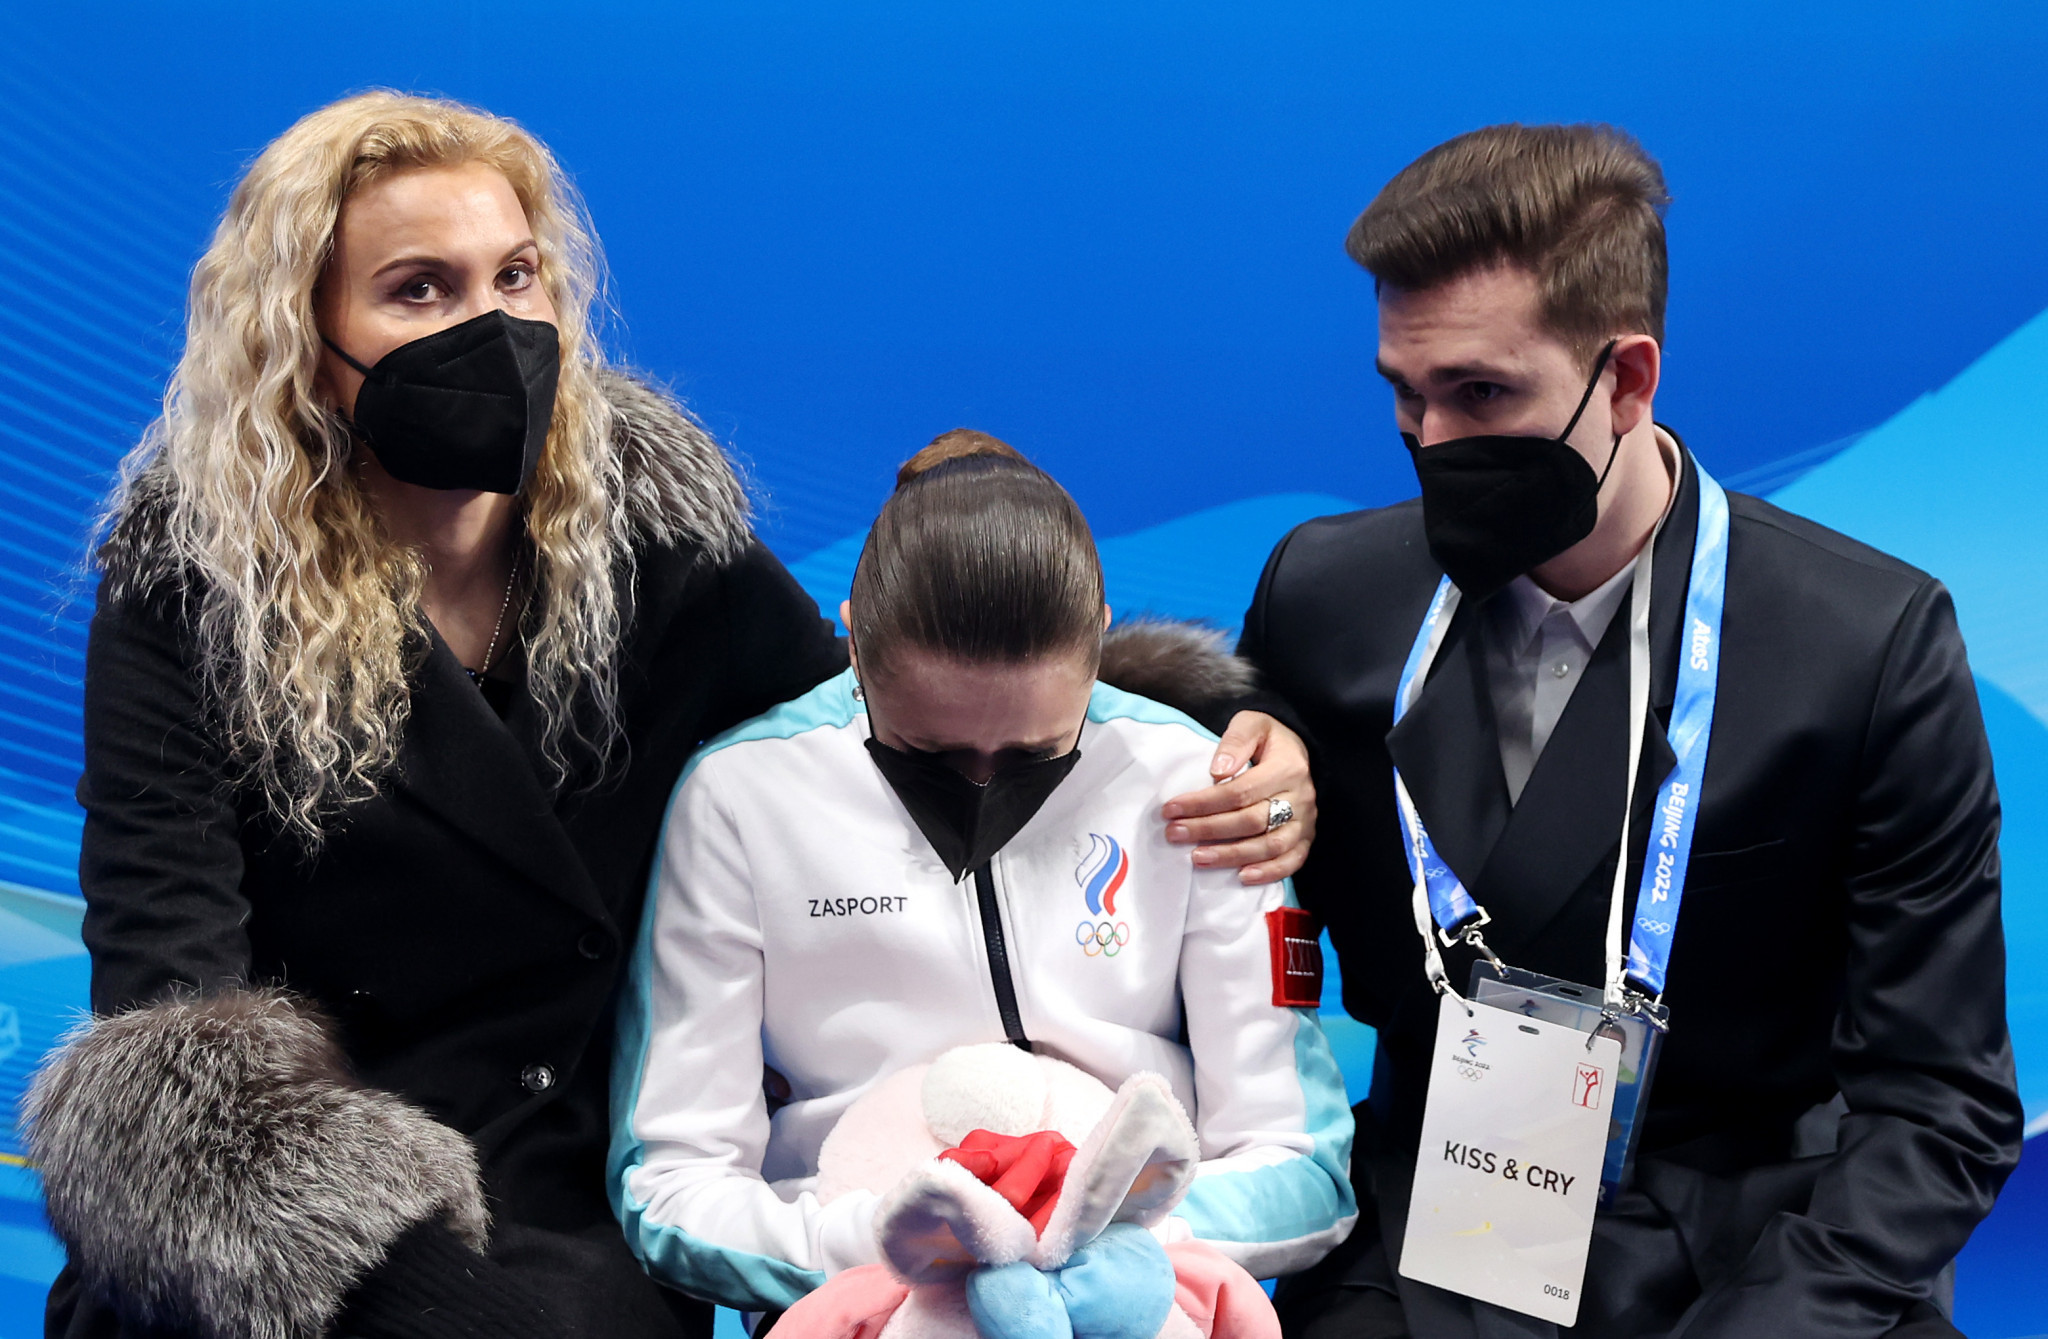 IOC President Thomas Bach criticised how Kamila Valieva's entourage, led by Eteri Tutberidze, treated her after she fell several times during the free programme and slipped to fourth ©Getty Images